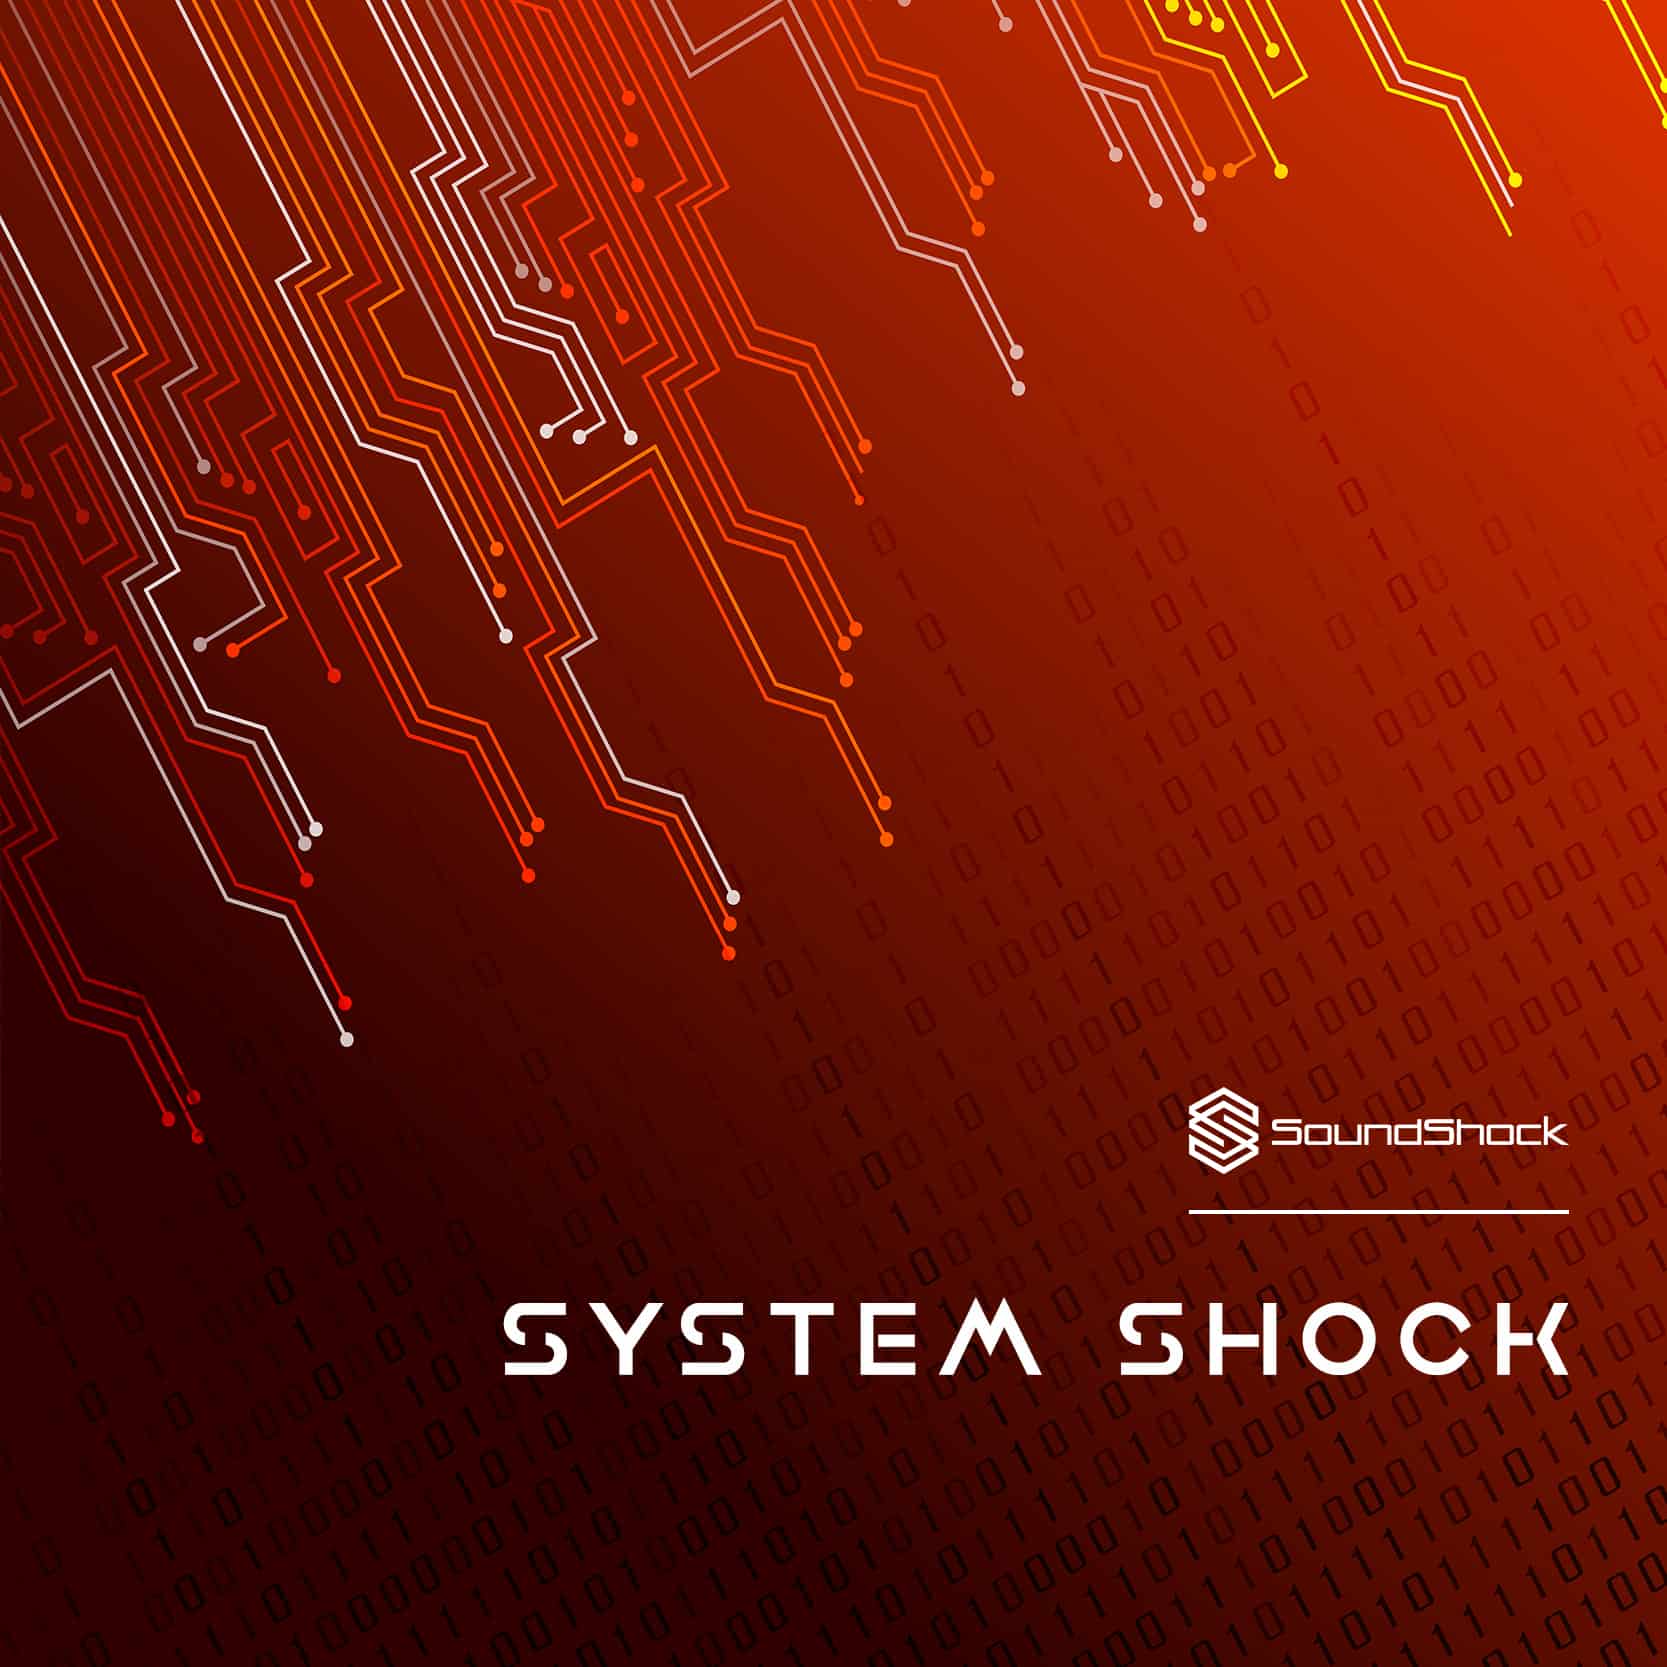 System Shock's cover.